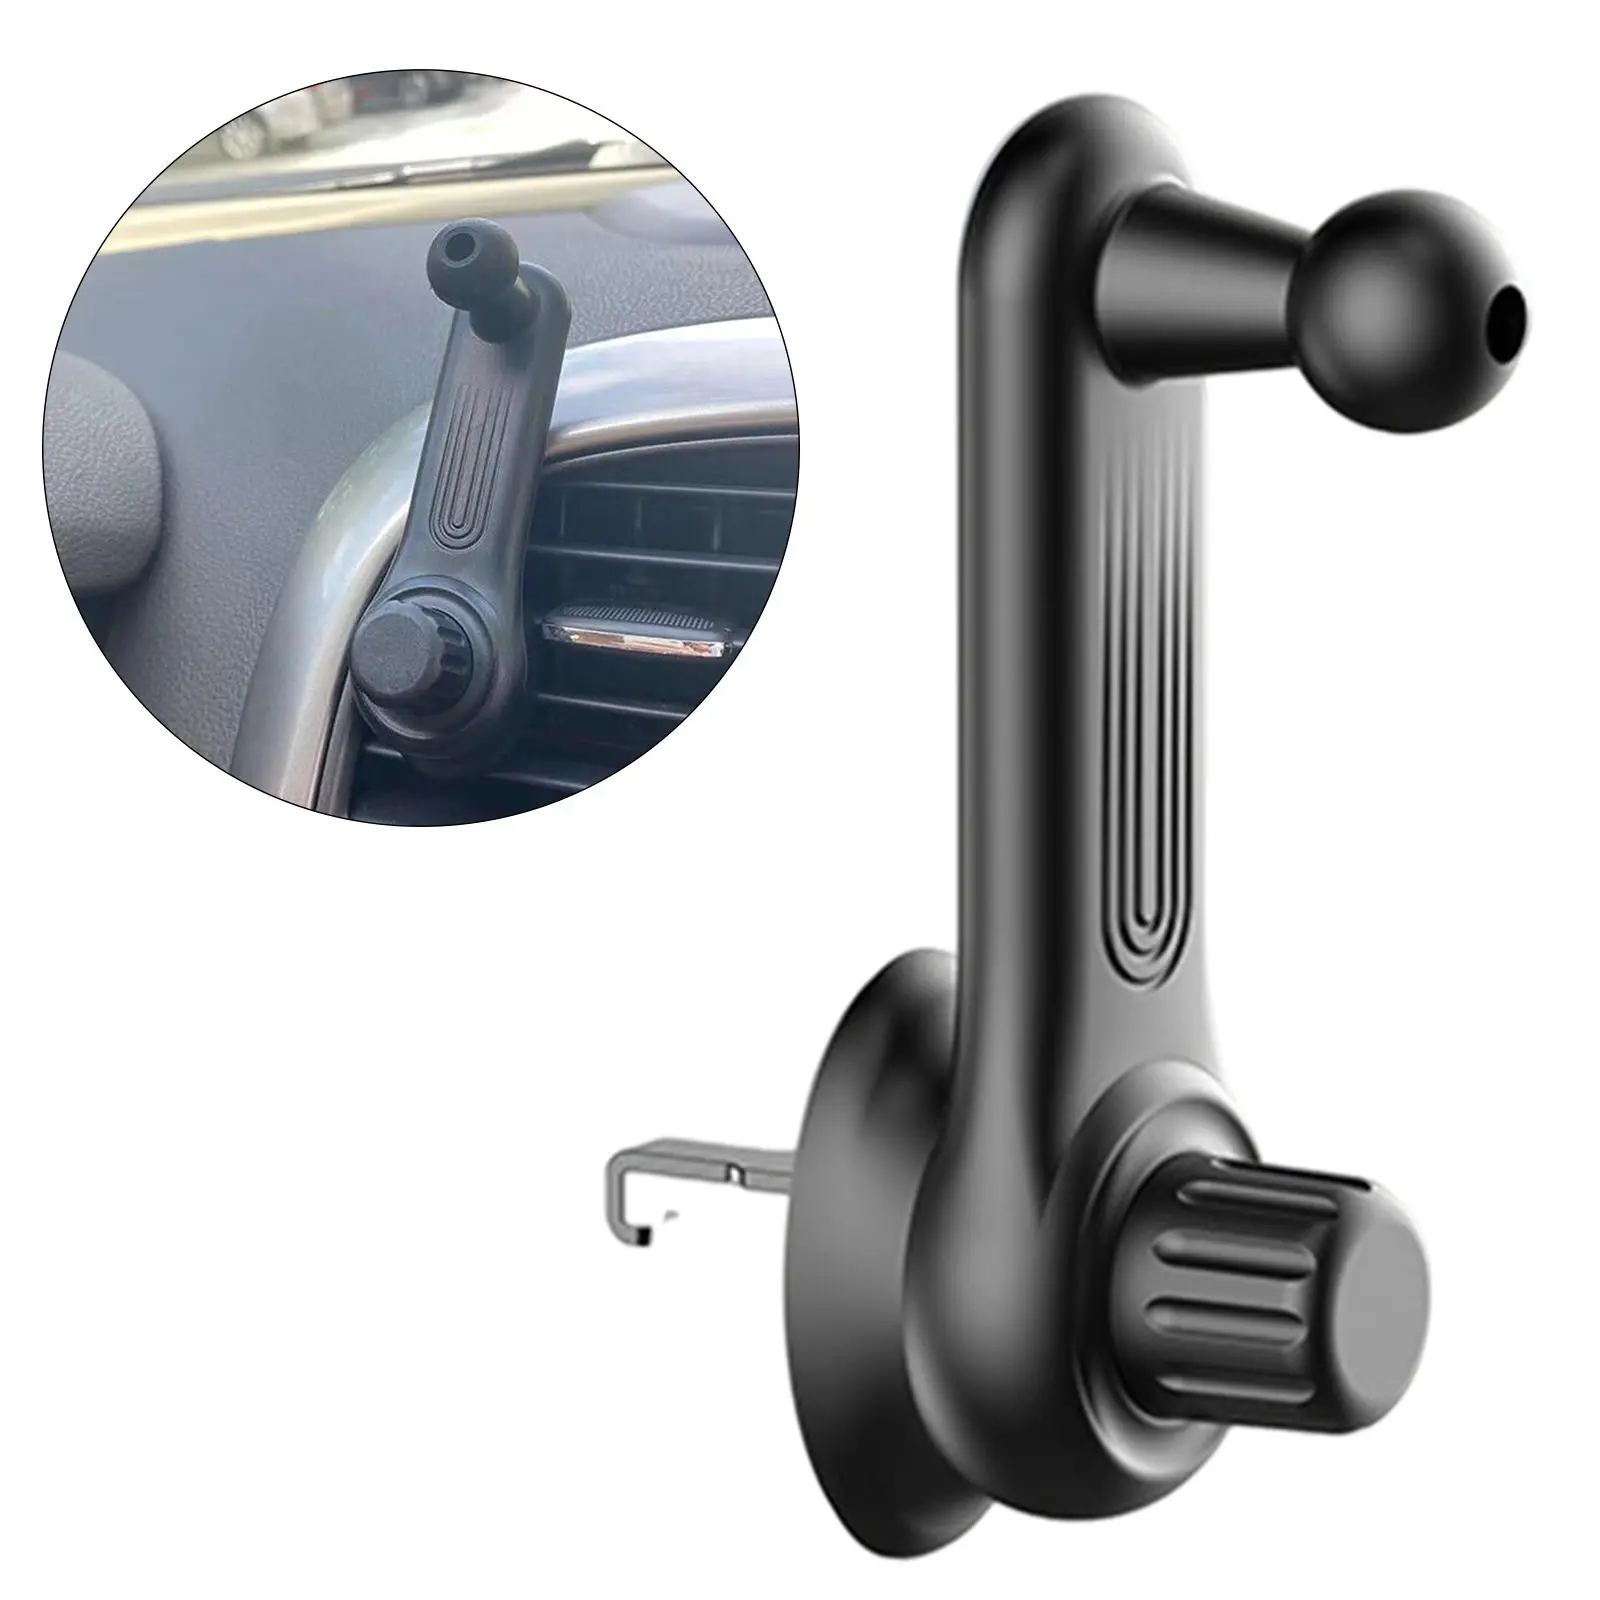 Clip Interior Car Phone Holder Mount Hands Free 360 Rotation Accessories Parts for Air Vent Outlet Cell Phone Charging Cable